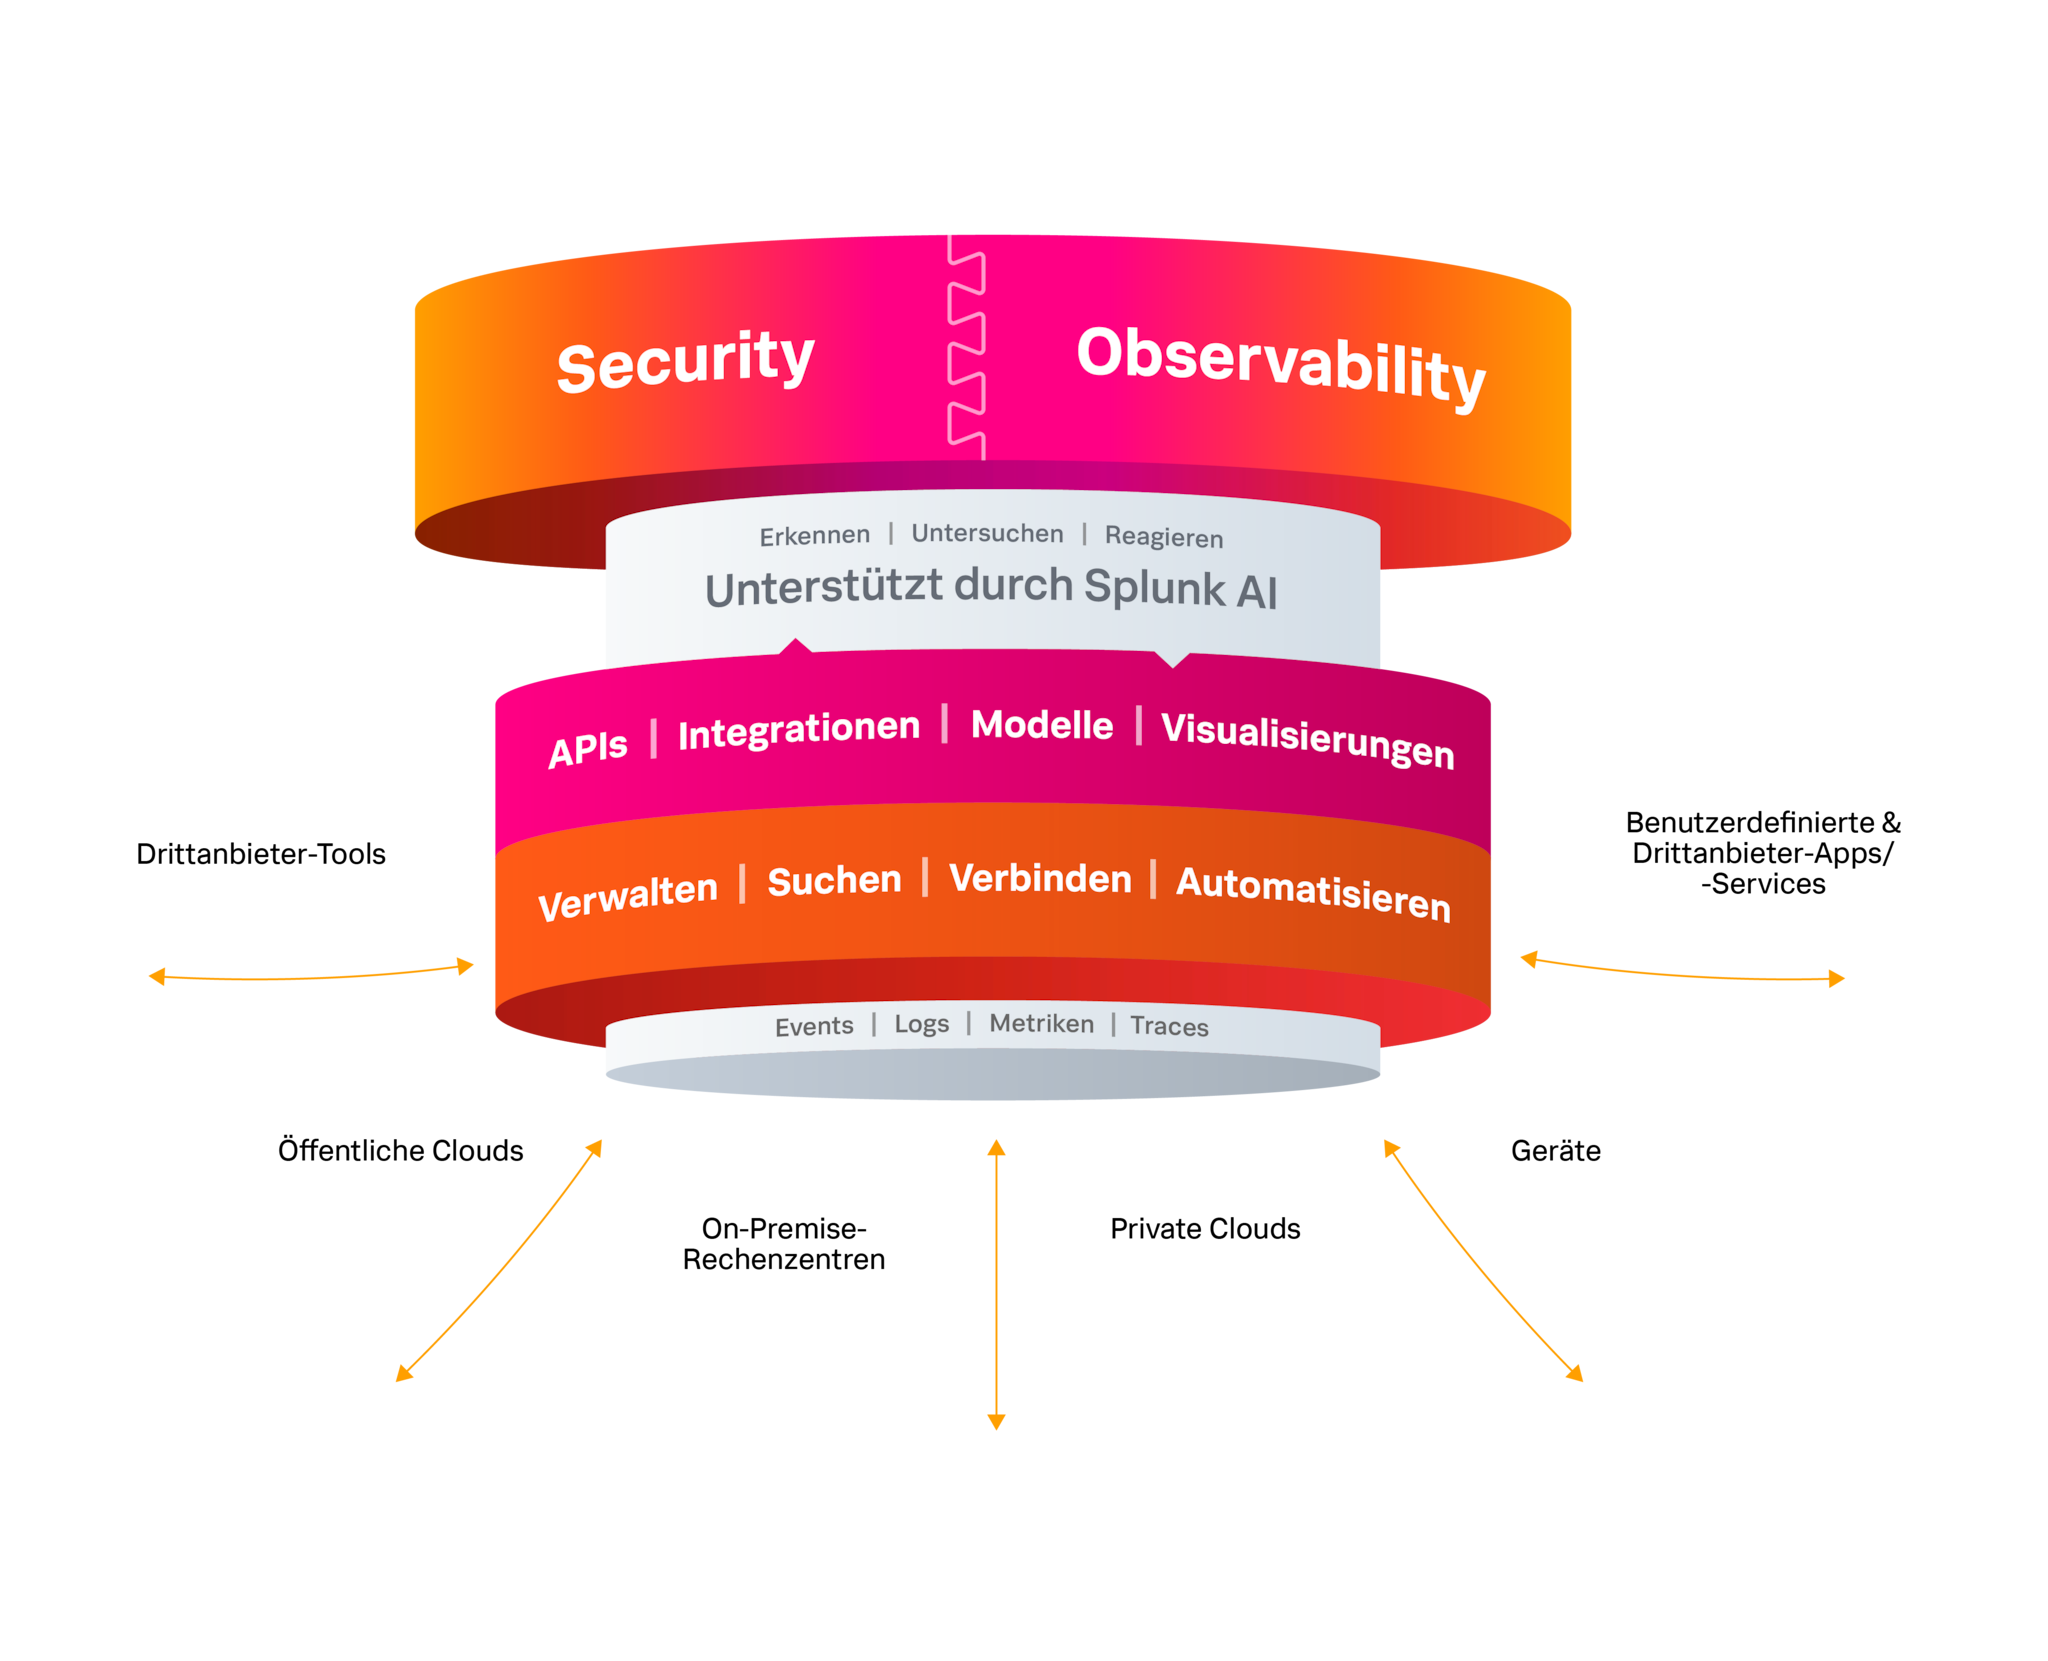 The Splunk platform provides unified solutions for security and observability on a unified platform, powered by Splunk AI